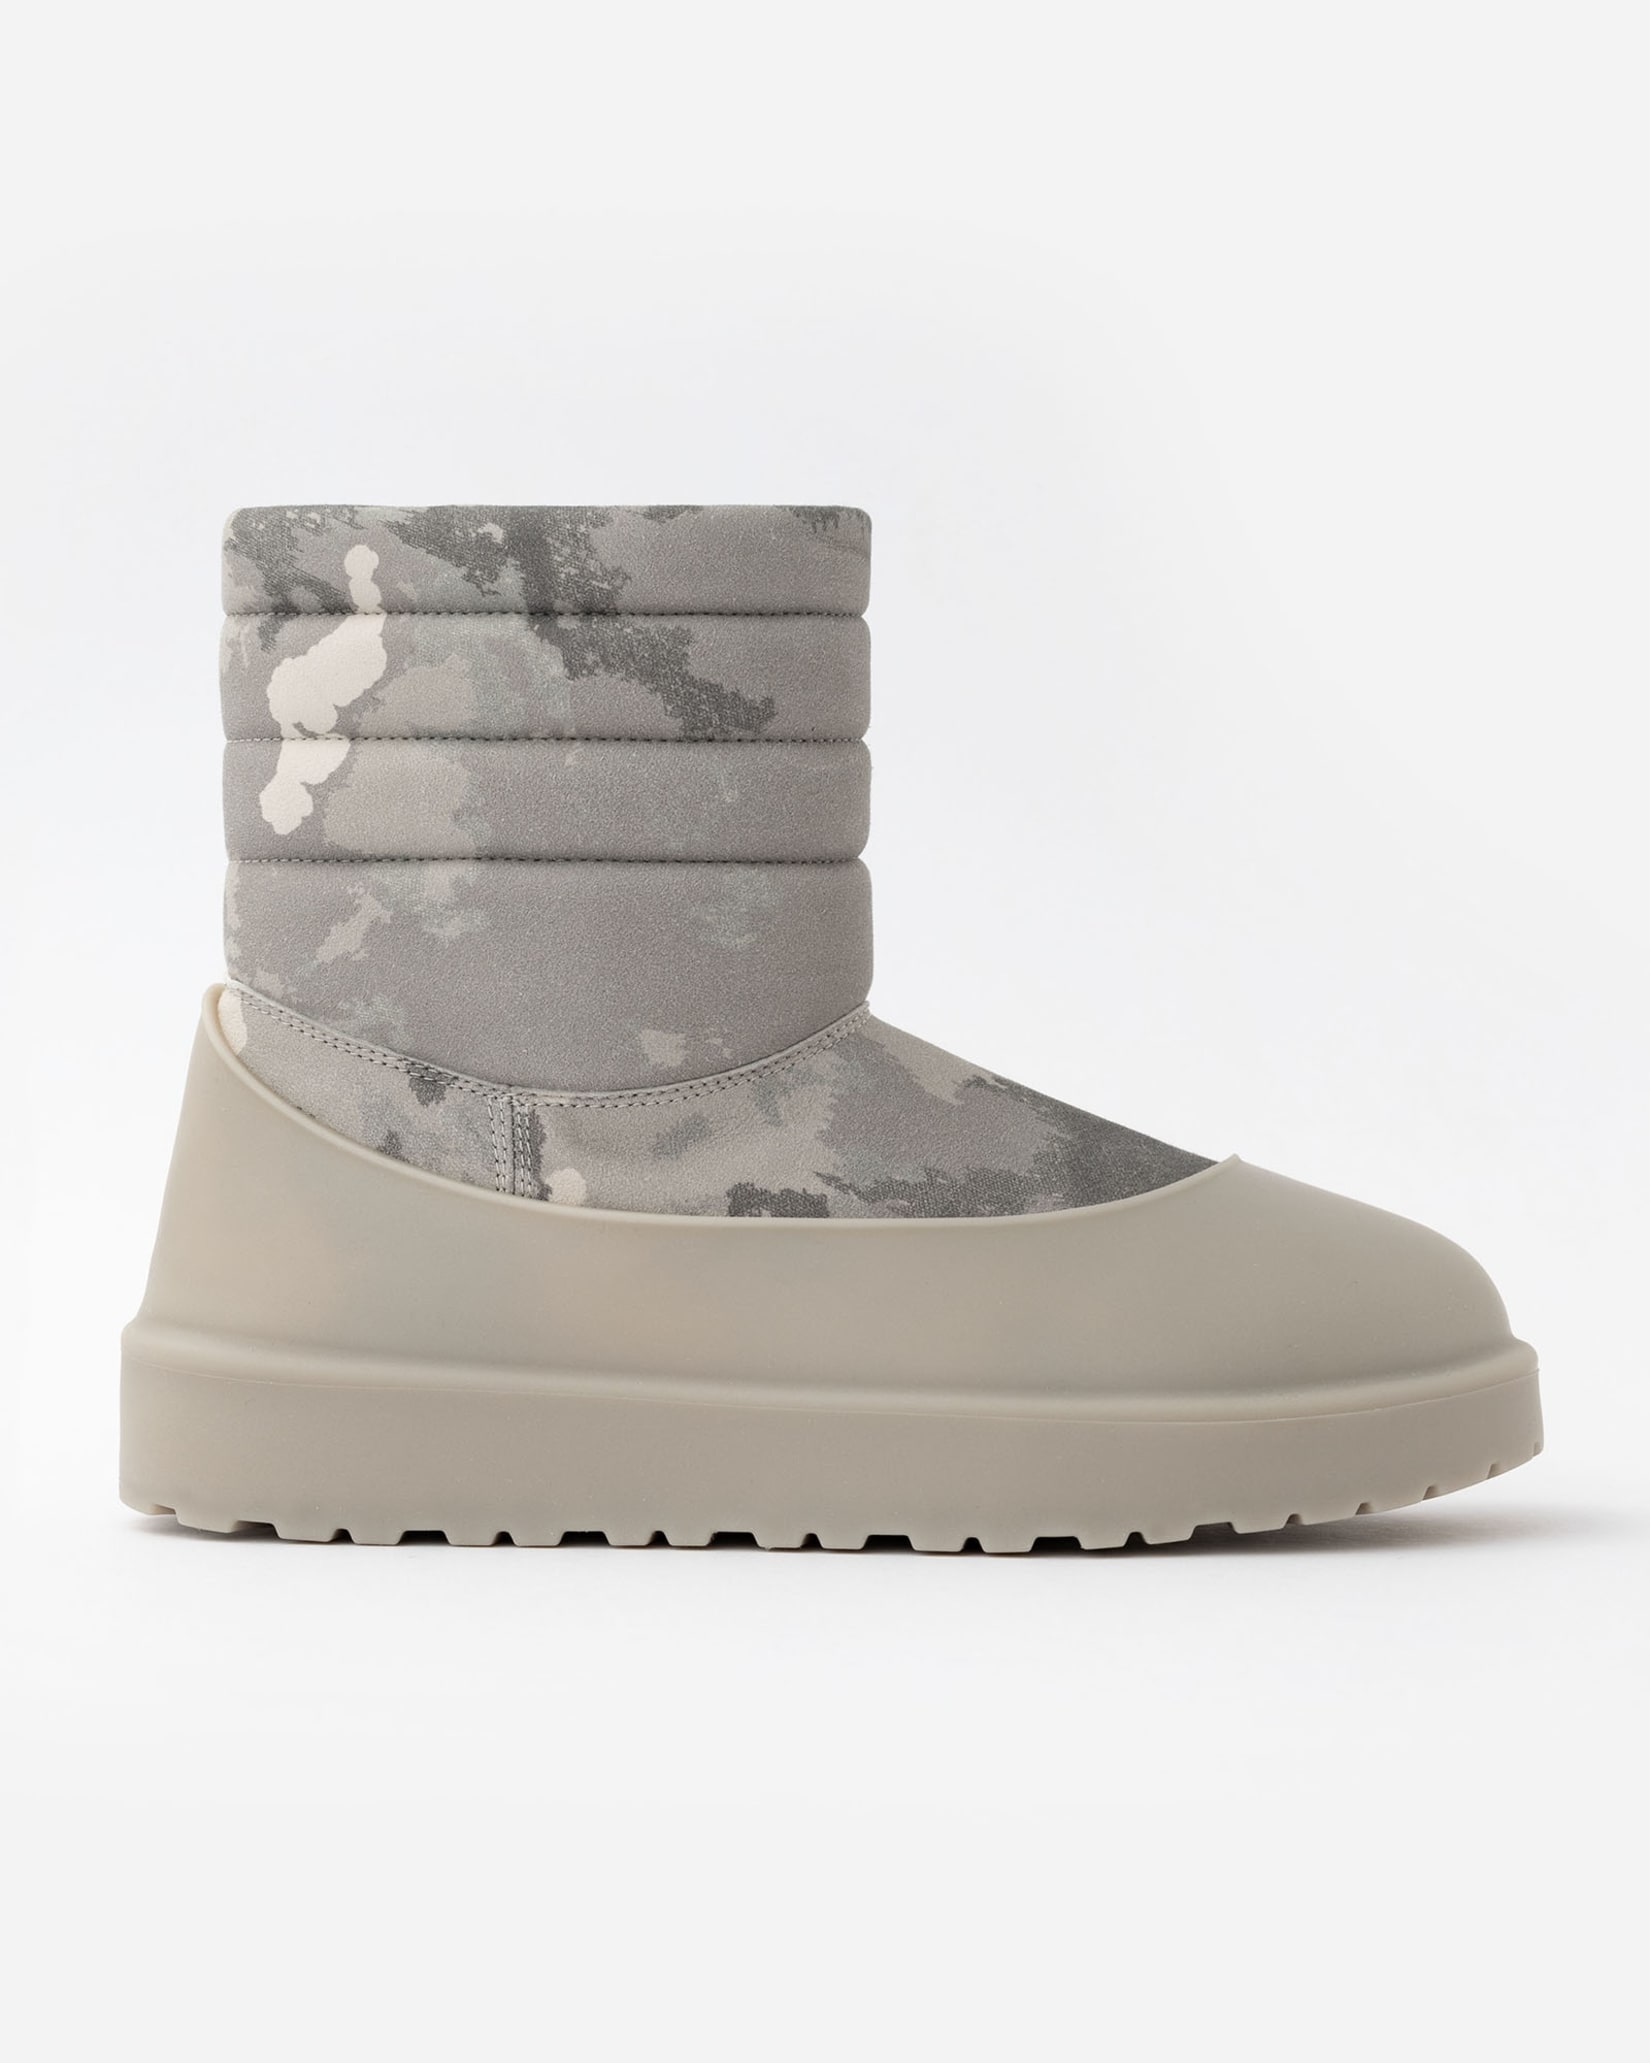 90th IDPG Dubbing boots with Sno-Seal